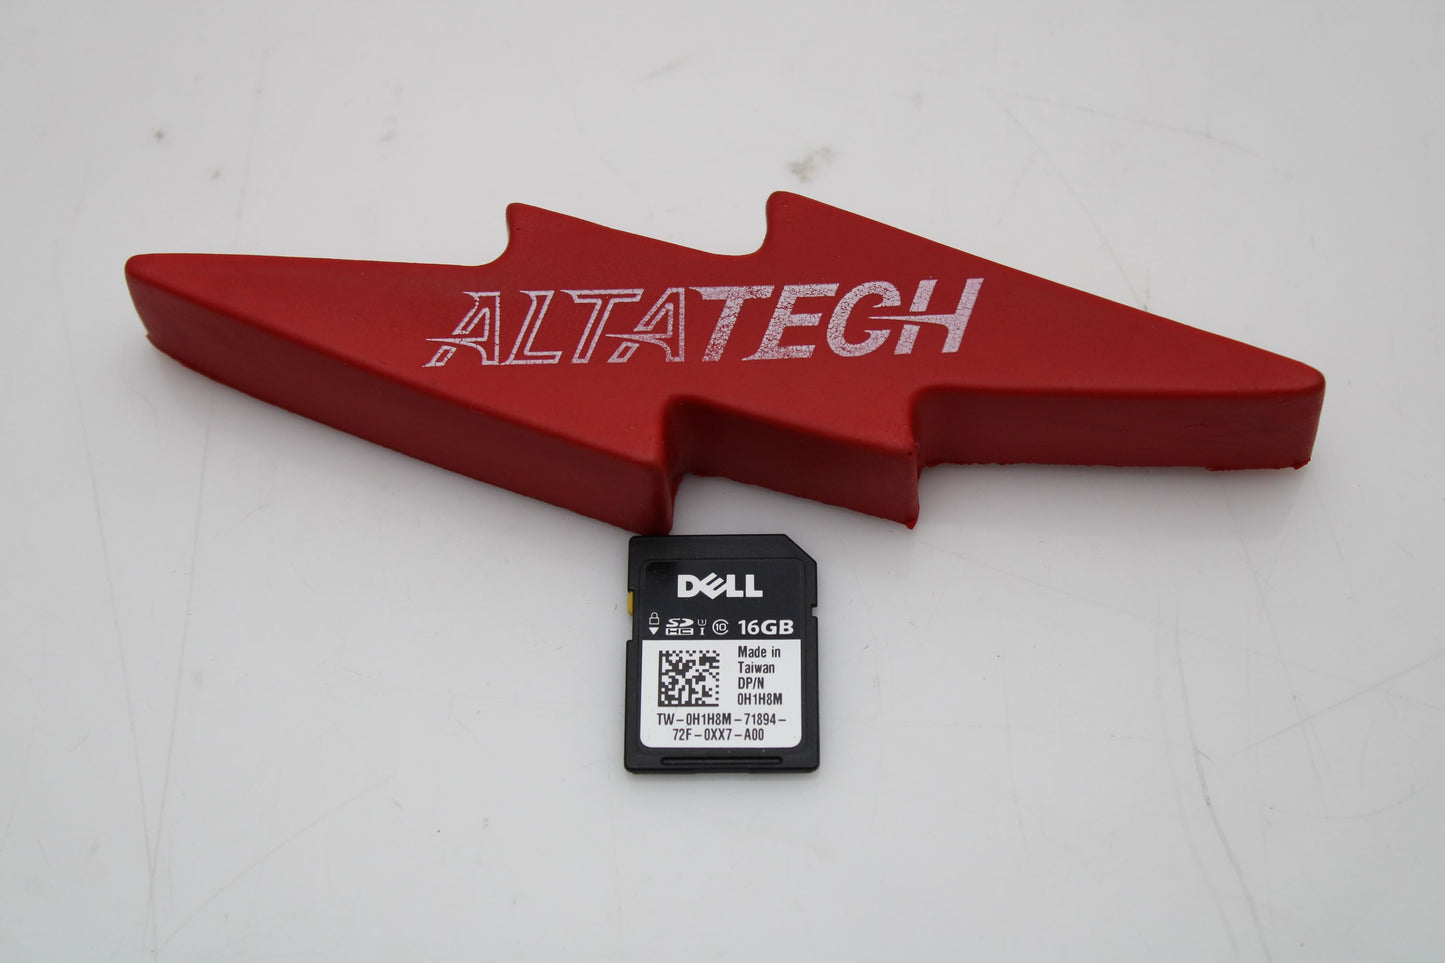 Dell 0H1H8M 16GB SD Card G13 ISDN HC R730, Used